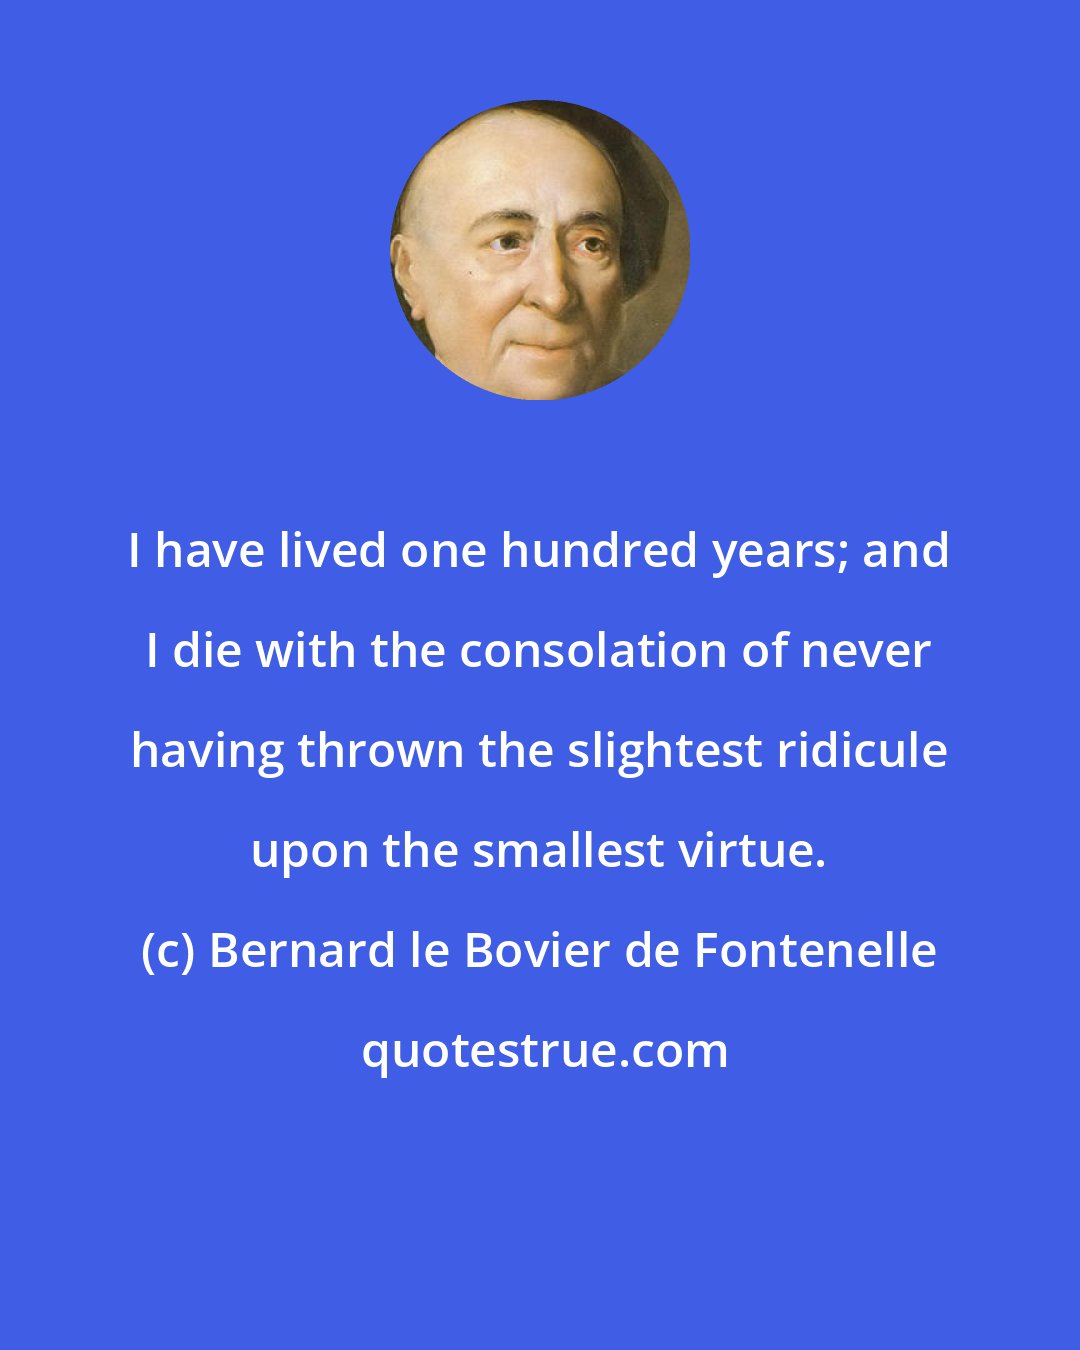 Bernard le Bovier de Fontenelle: I have lived one hundred years; and I die with the consolation of never having thrown the slightest ridicule upon the smallest virtue.